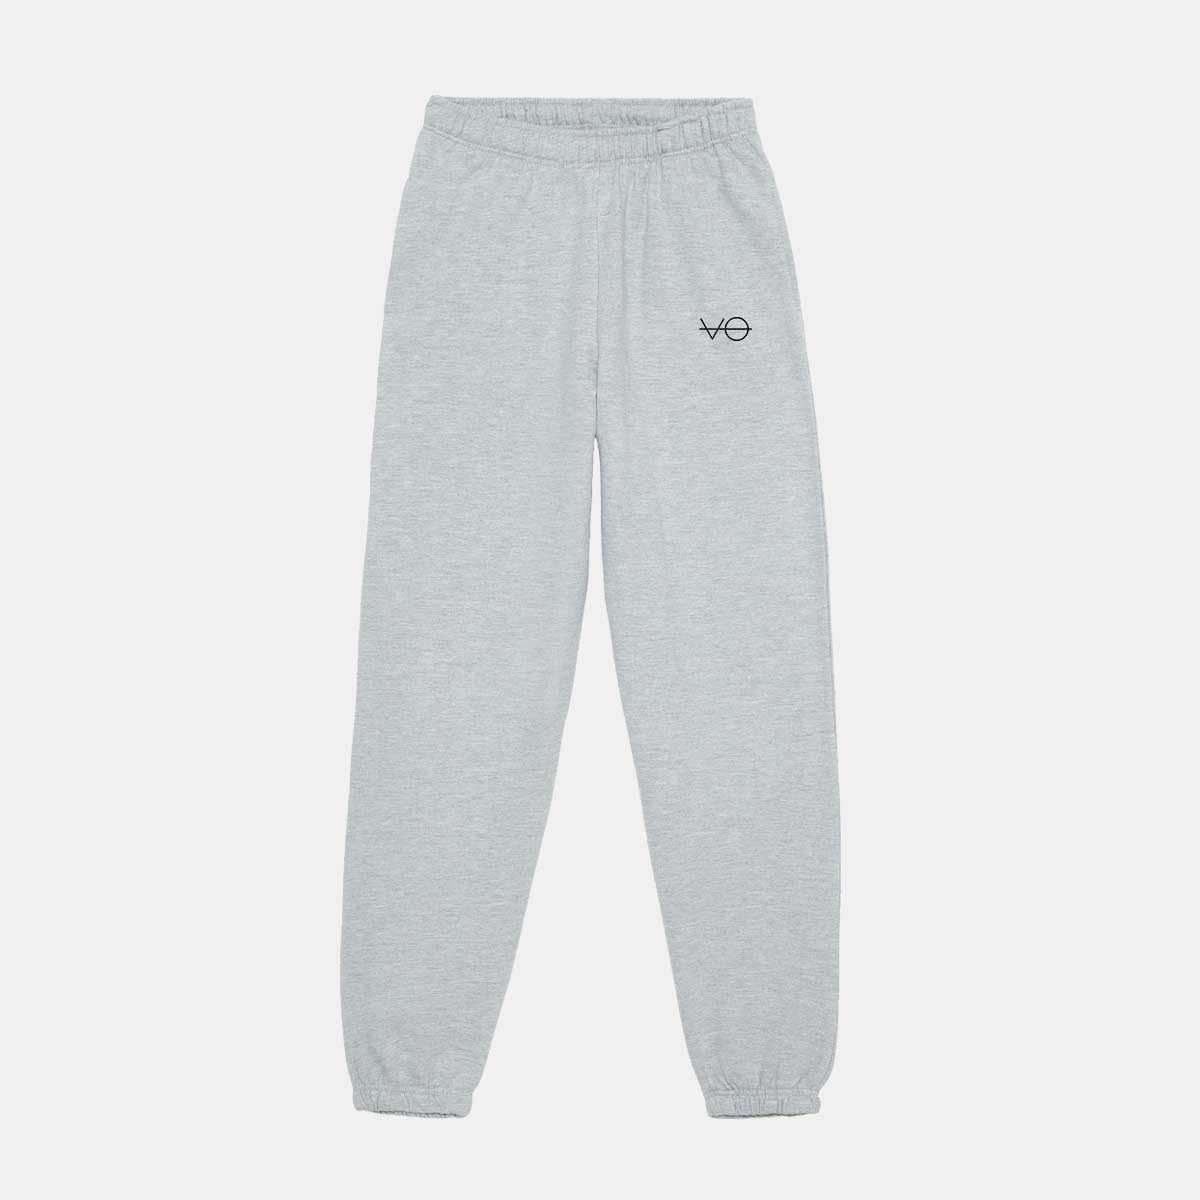 Classic Fit VO Embroidered Joggers (Unisex) – Vegan Outfitters